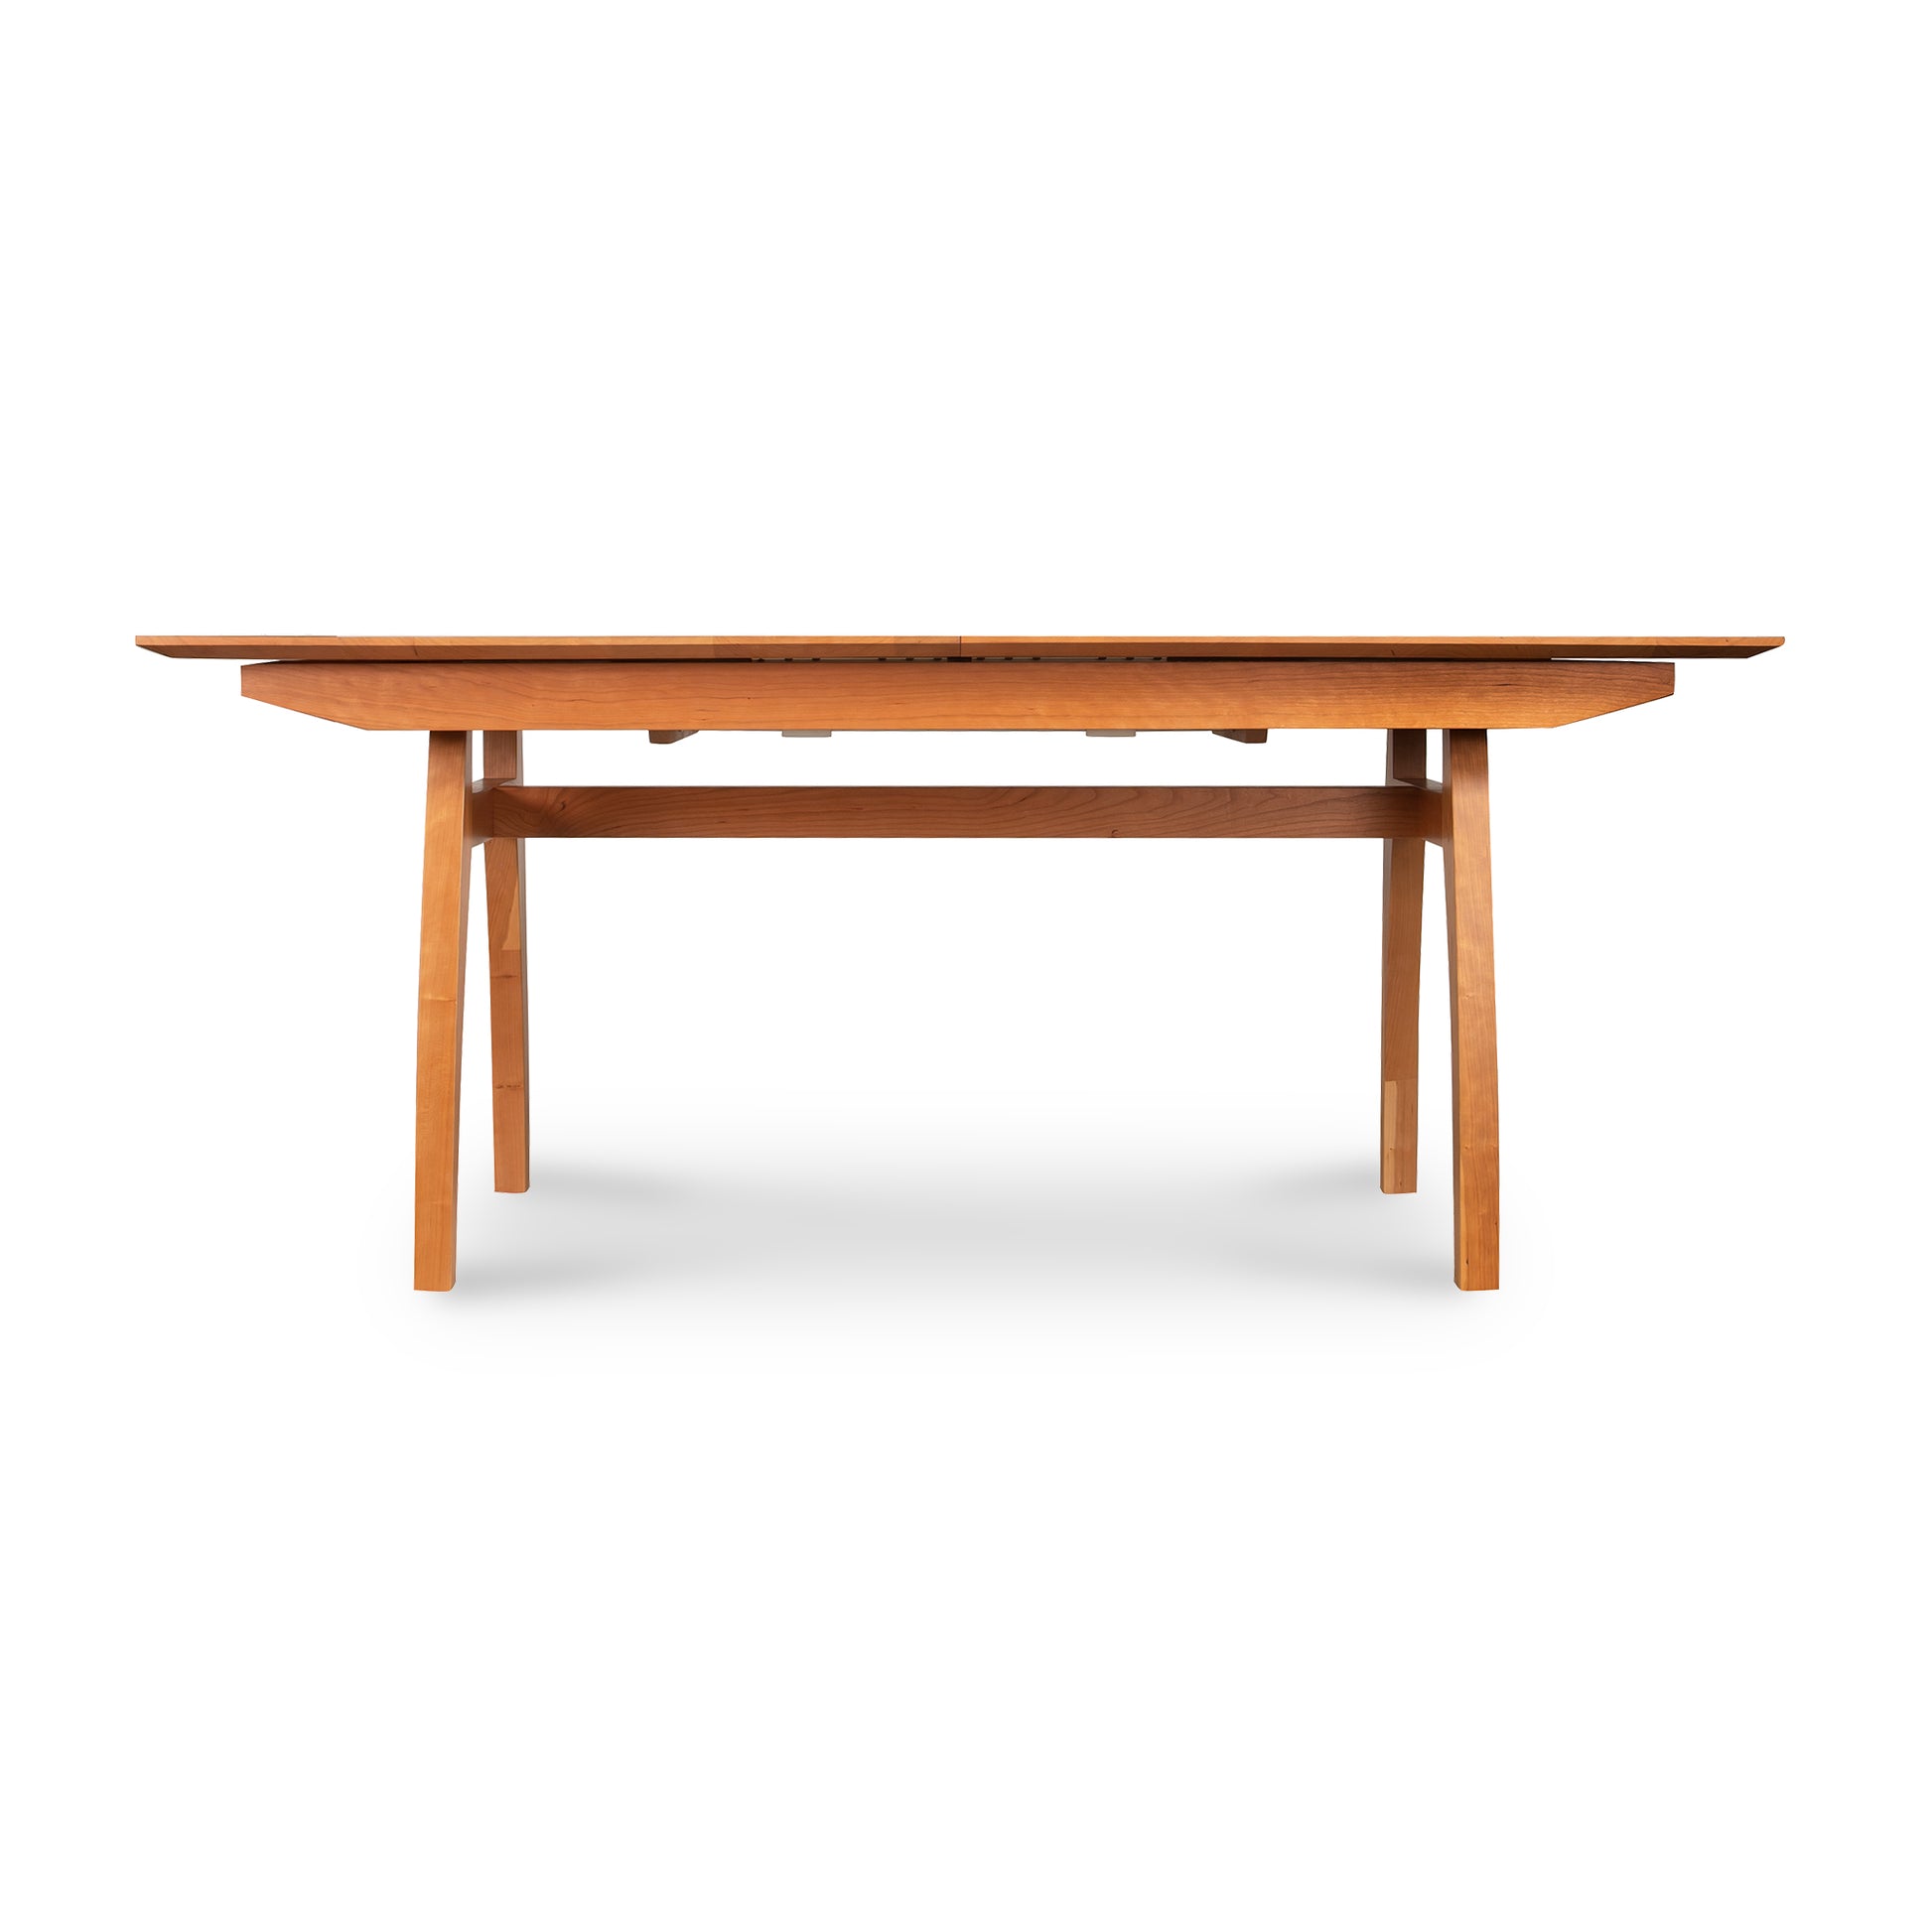 A high-end, handmade Vermont Modern Butterfly Extension Table - Floor Model with a wooden top by Lyndon Furniture.